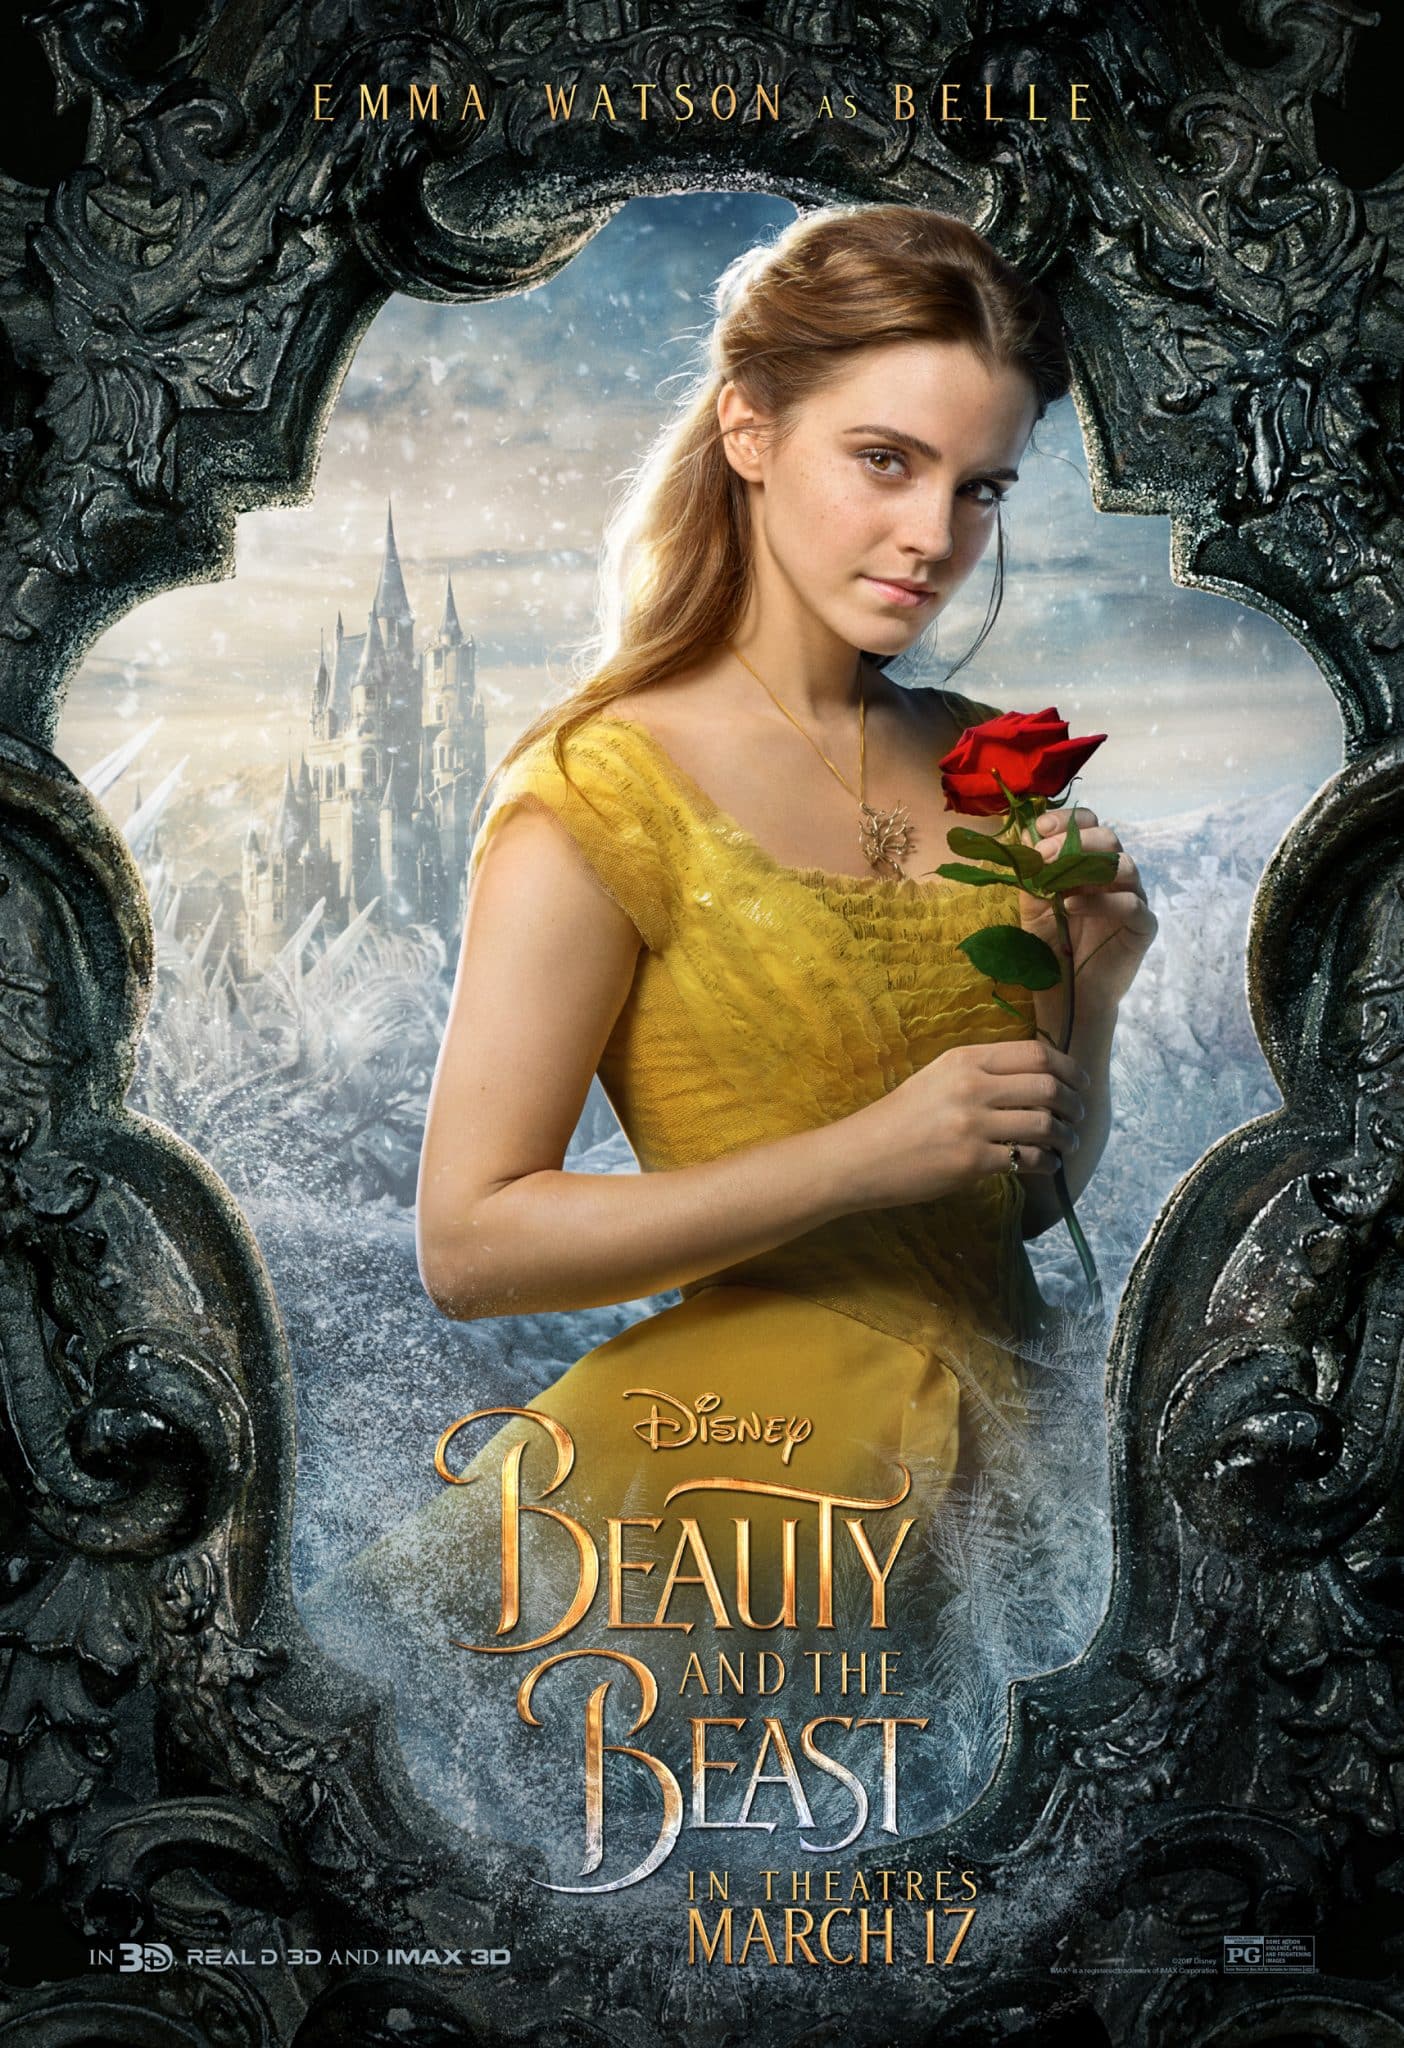 Character Posters for Disney's Beauty And The Beast #BeOurGuest #BeautyAndTheBeast